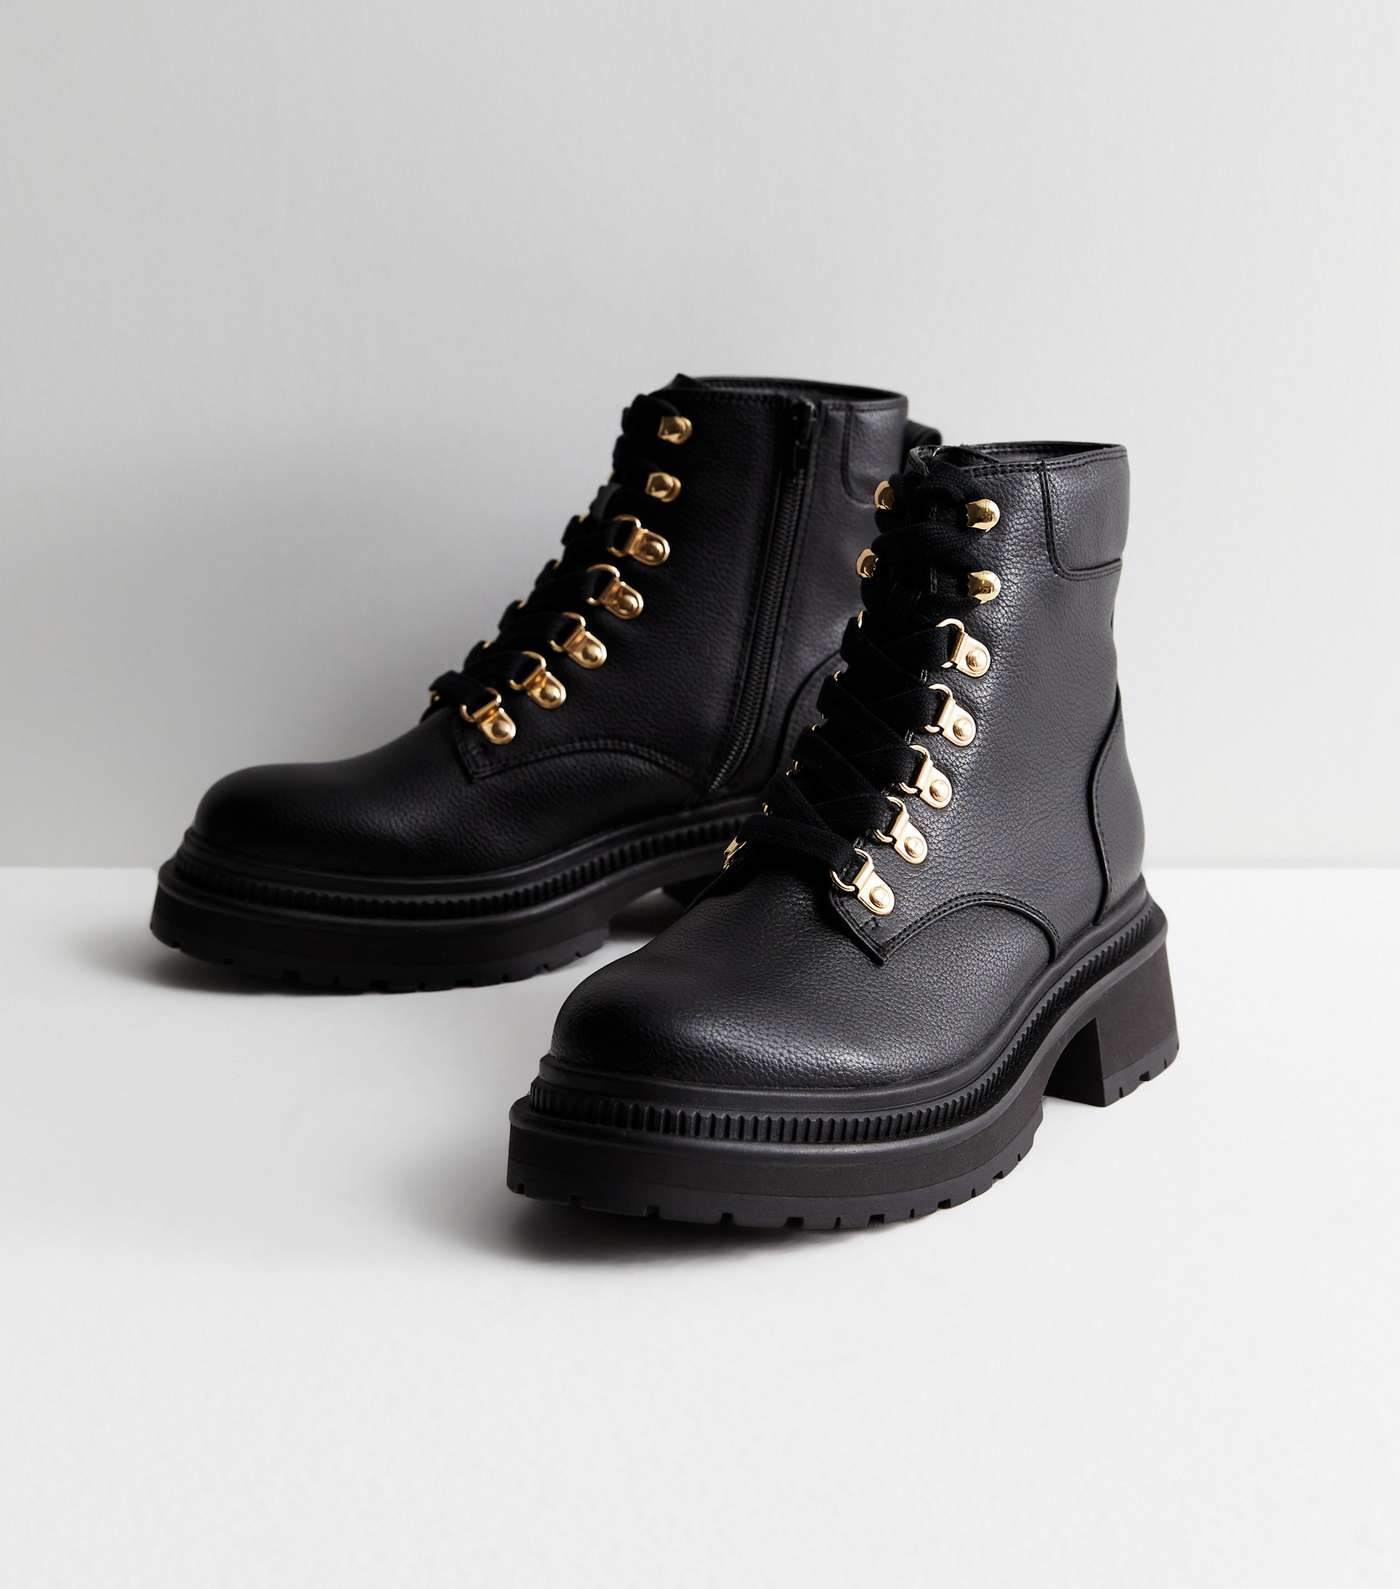 Black Leather-Look Chunky Biker Boots Image 5